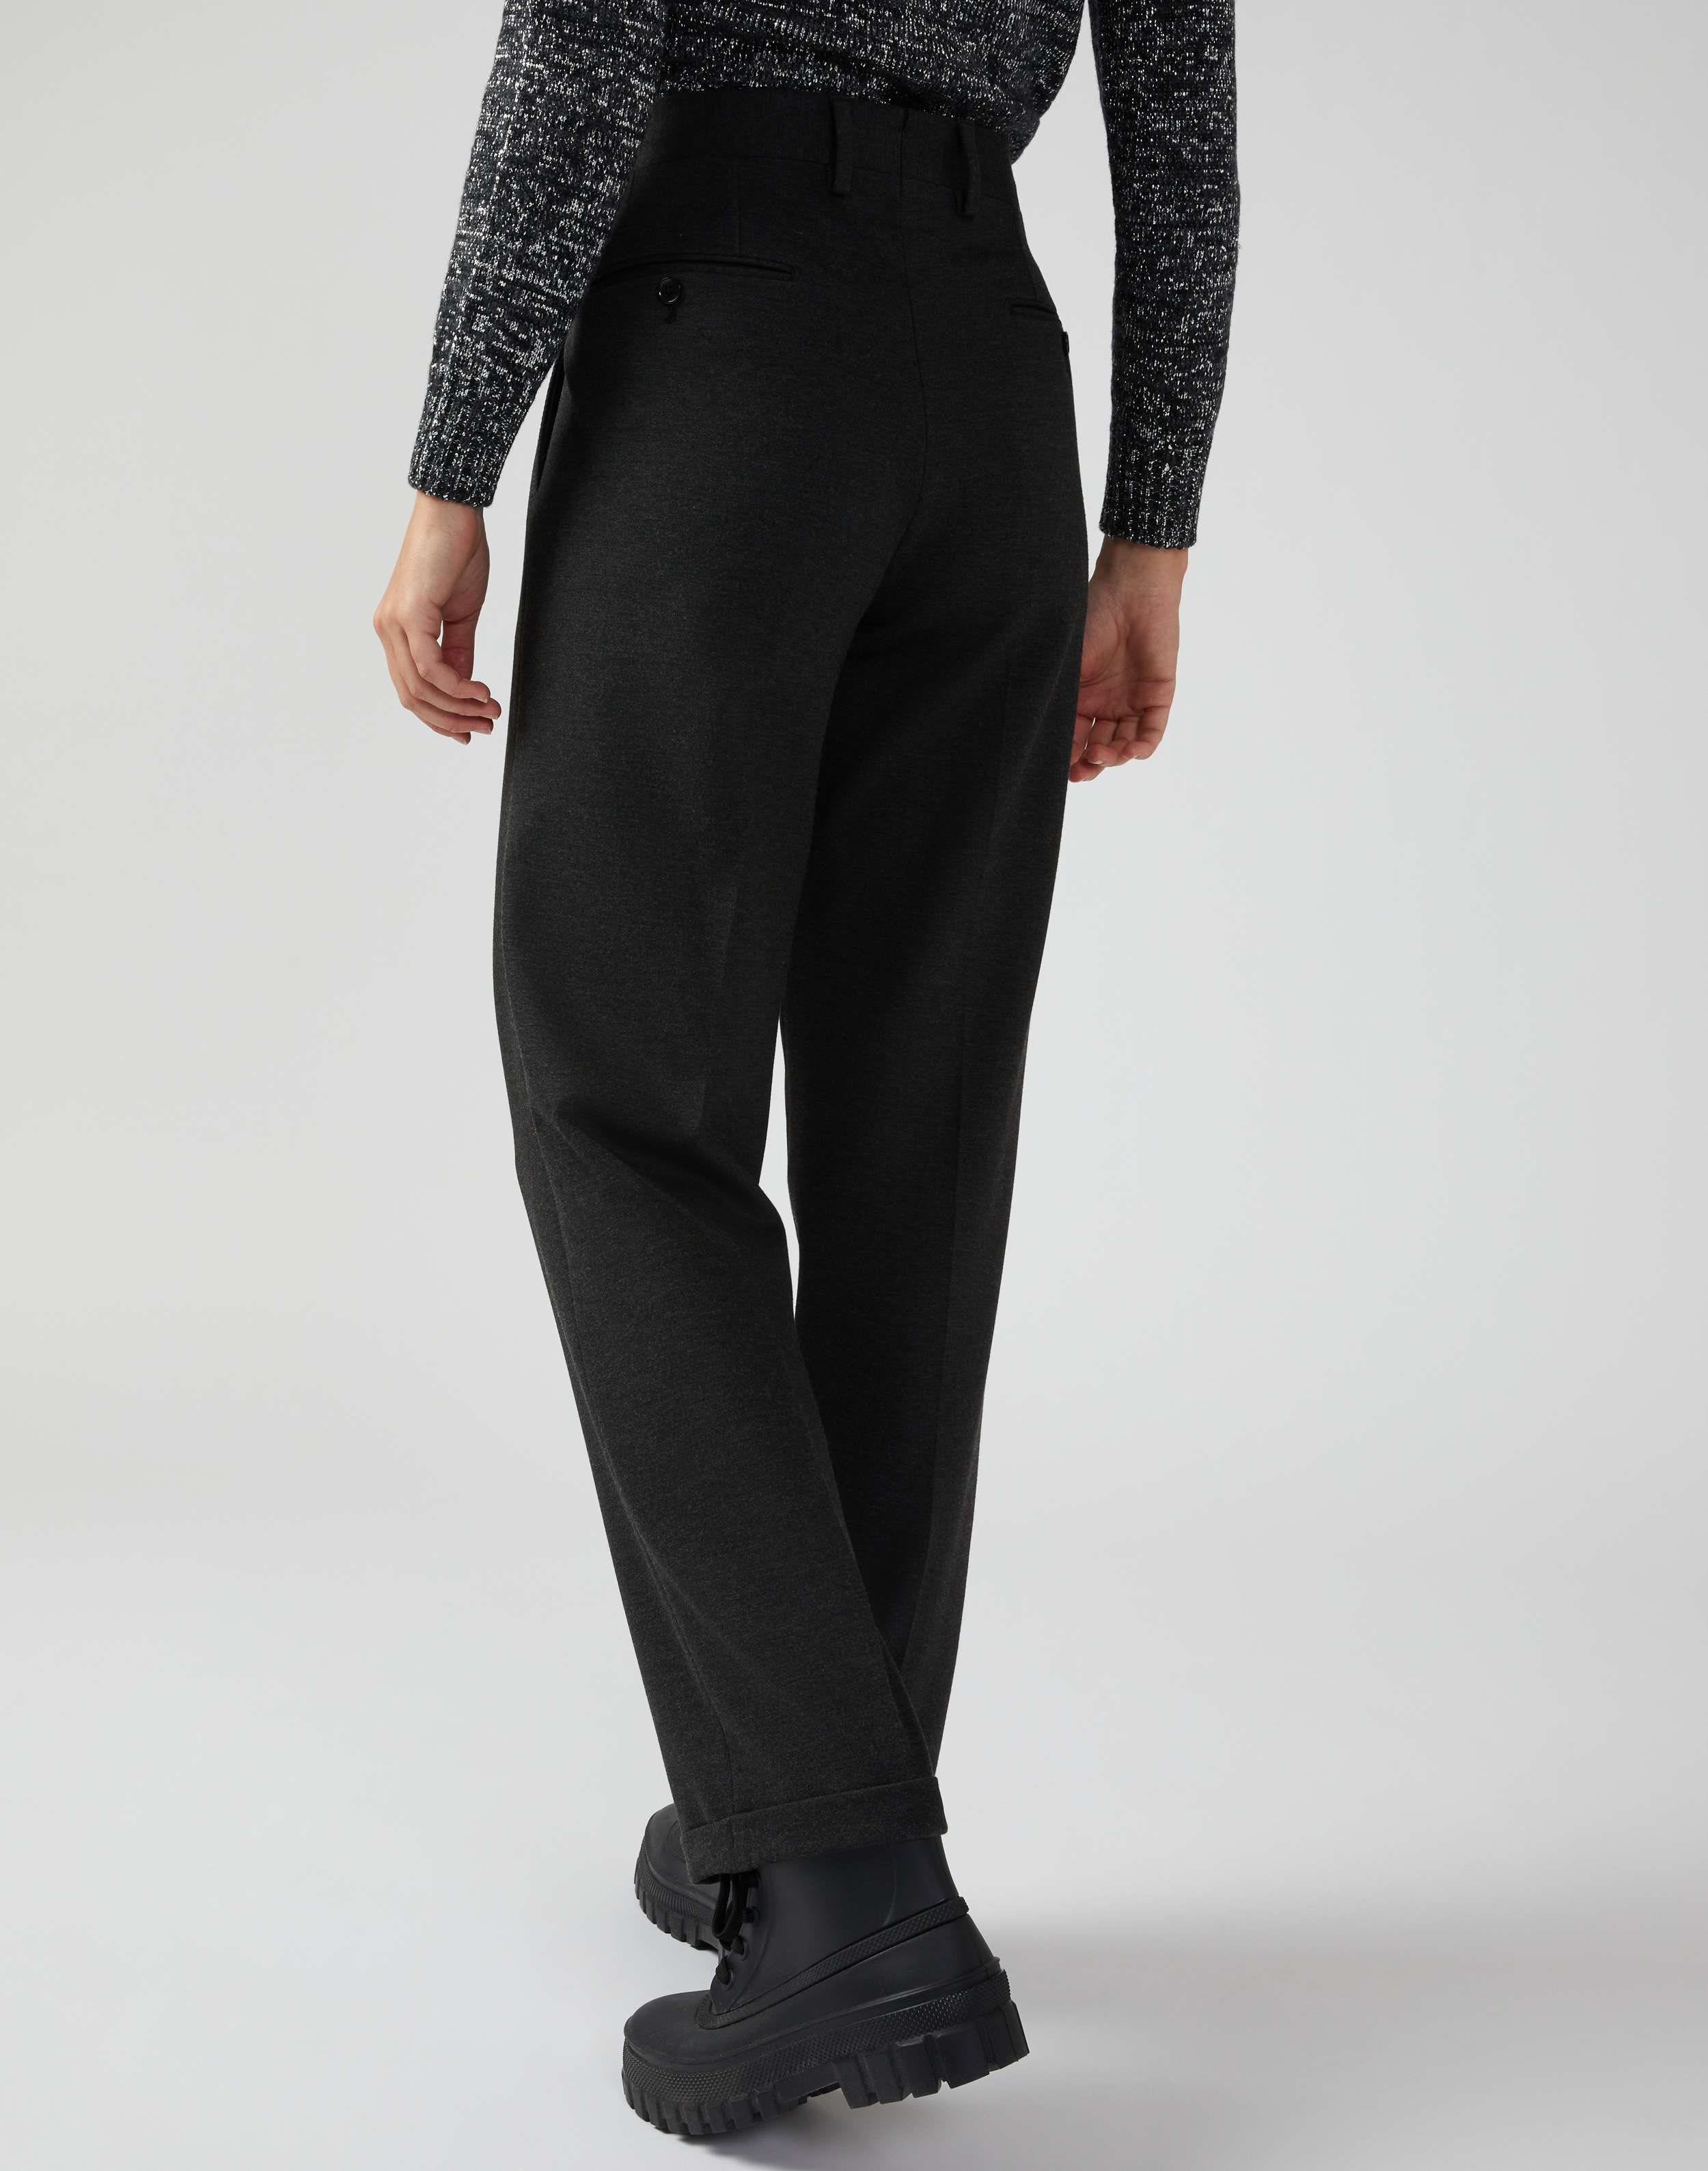 Classic grey trousers in Milanese warp knit viscose 